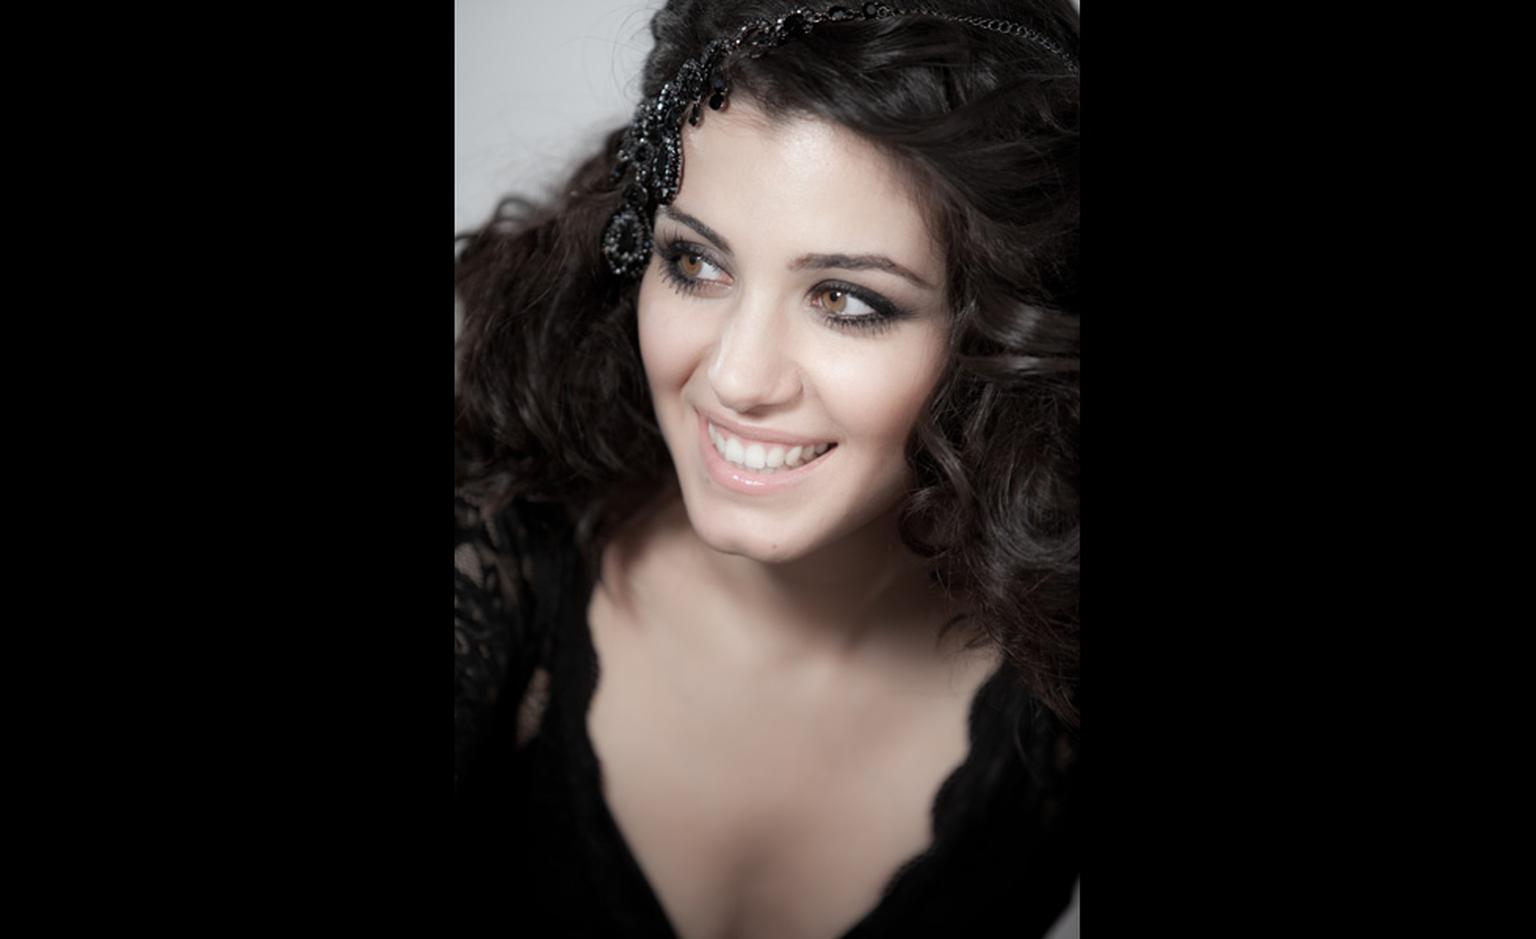 Katie Melua will play at City Rocks charity concert on Feb 22 in the City of London.